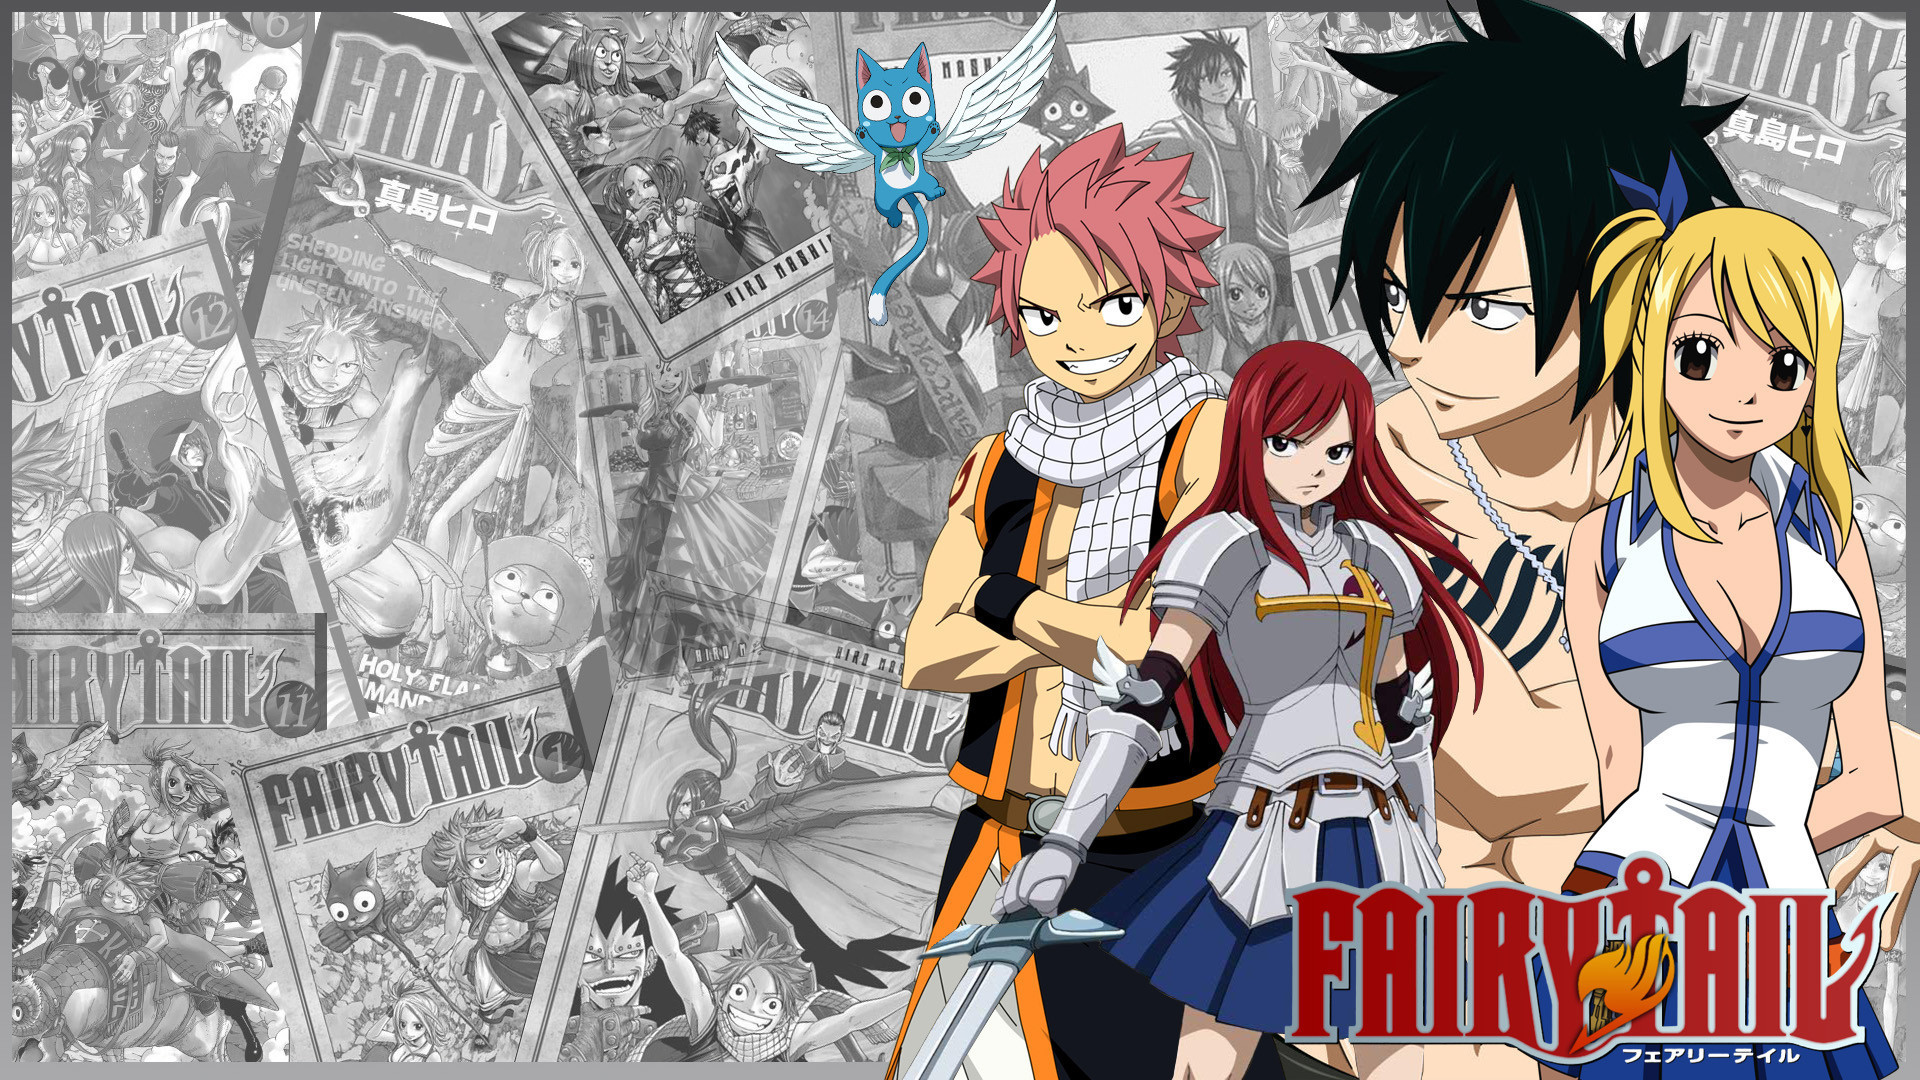 1920x1080  Ewallpaper Hub brings Fairy Tail Wallpaper in high resolution for  you. We collect premium